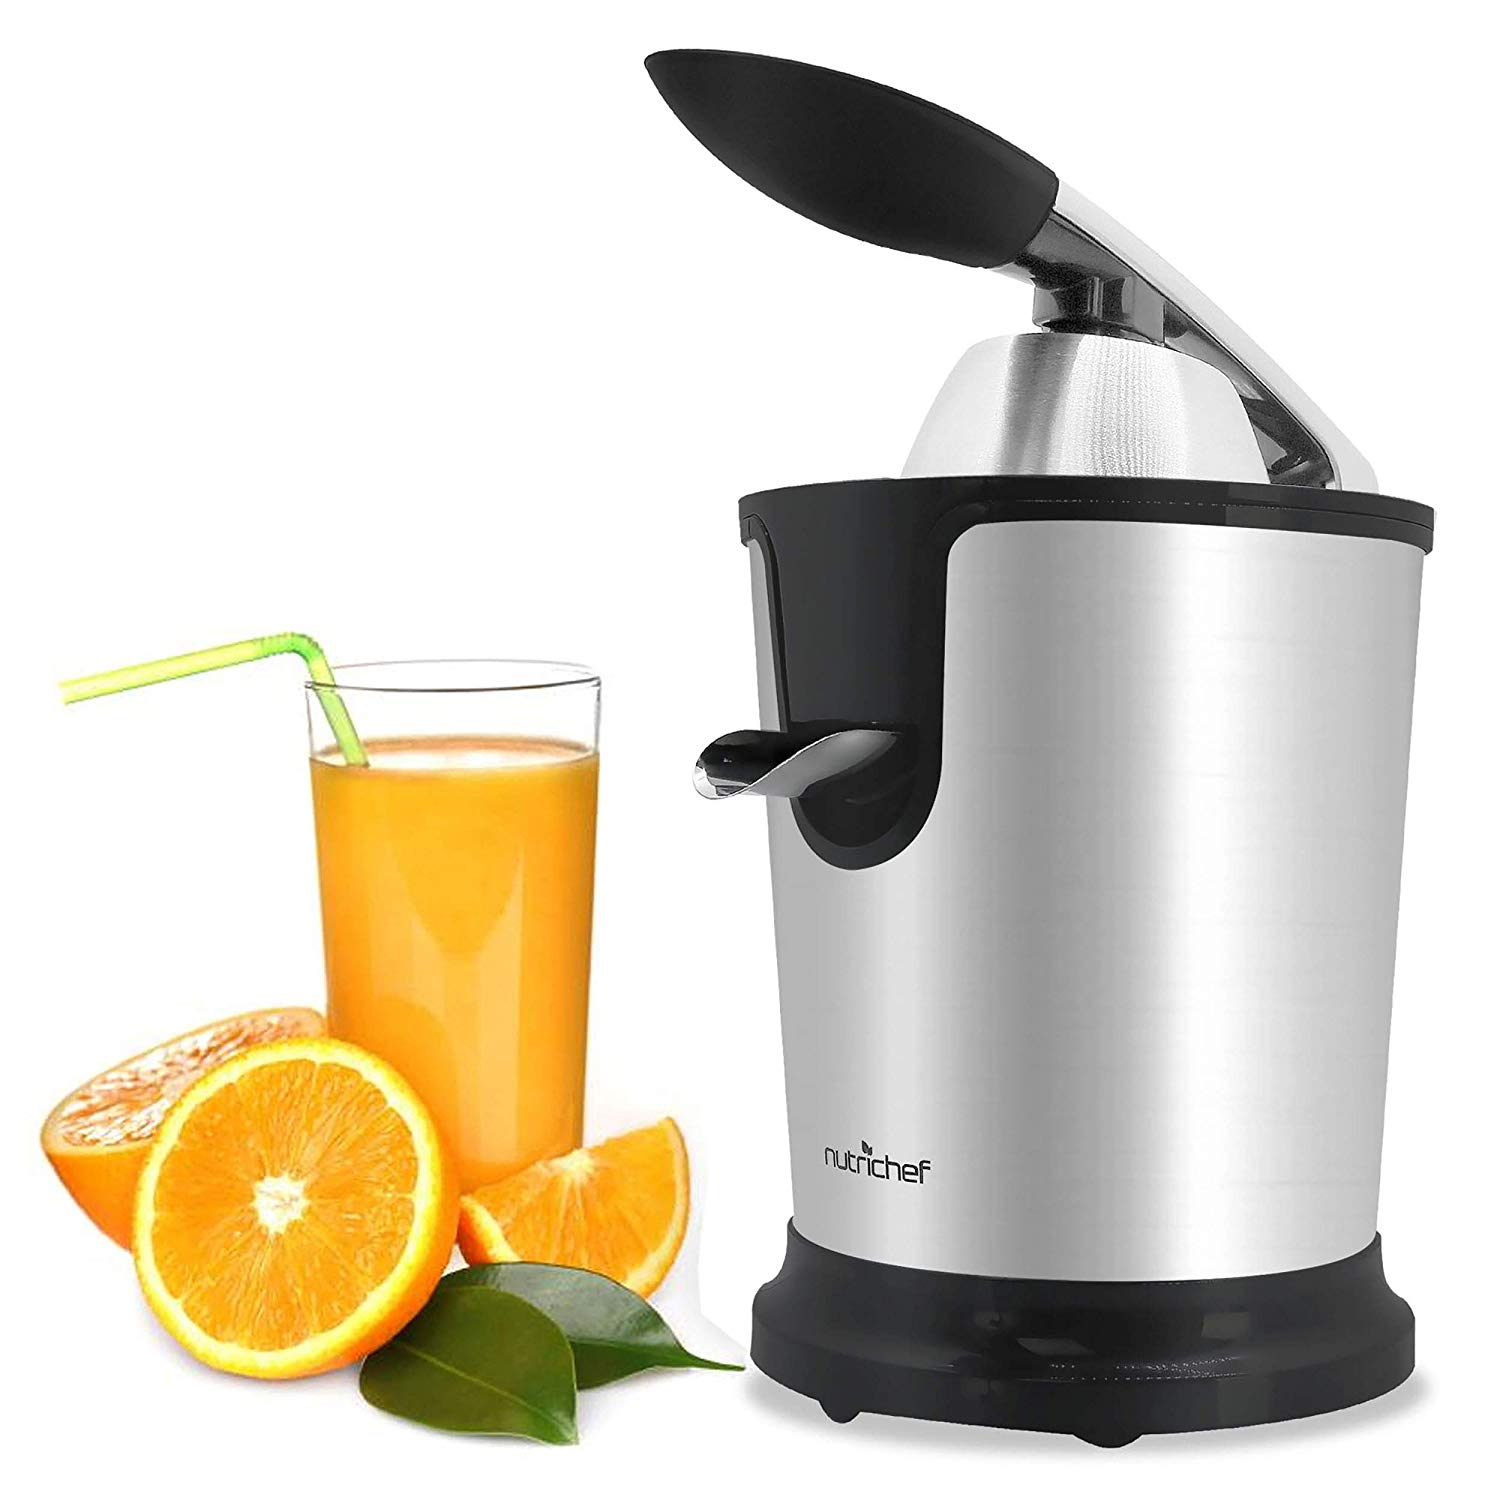 Nutri Chuzy Chef Stainless Steel Electric Juice Press - Citrus Juicer or Squeezer Masticating Machine with 160W Power, Handle and Cone for Orange